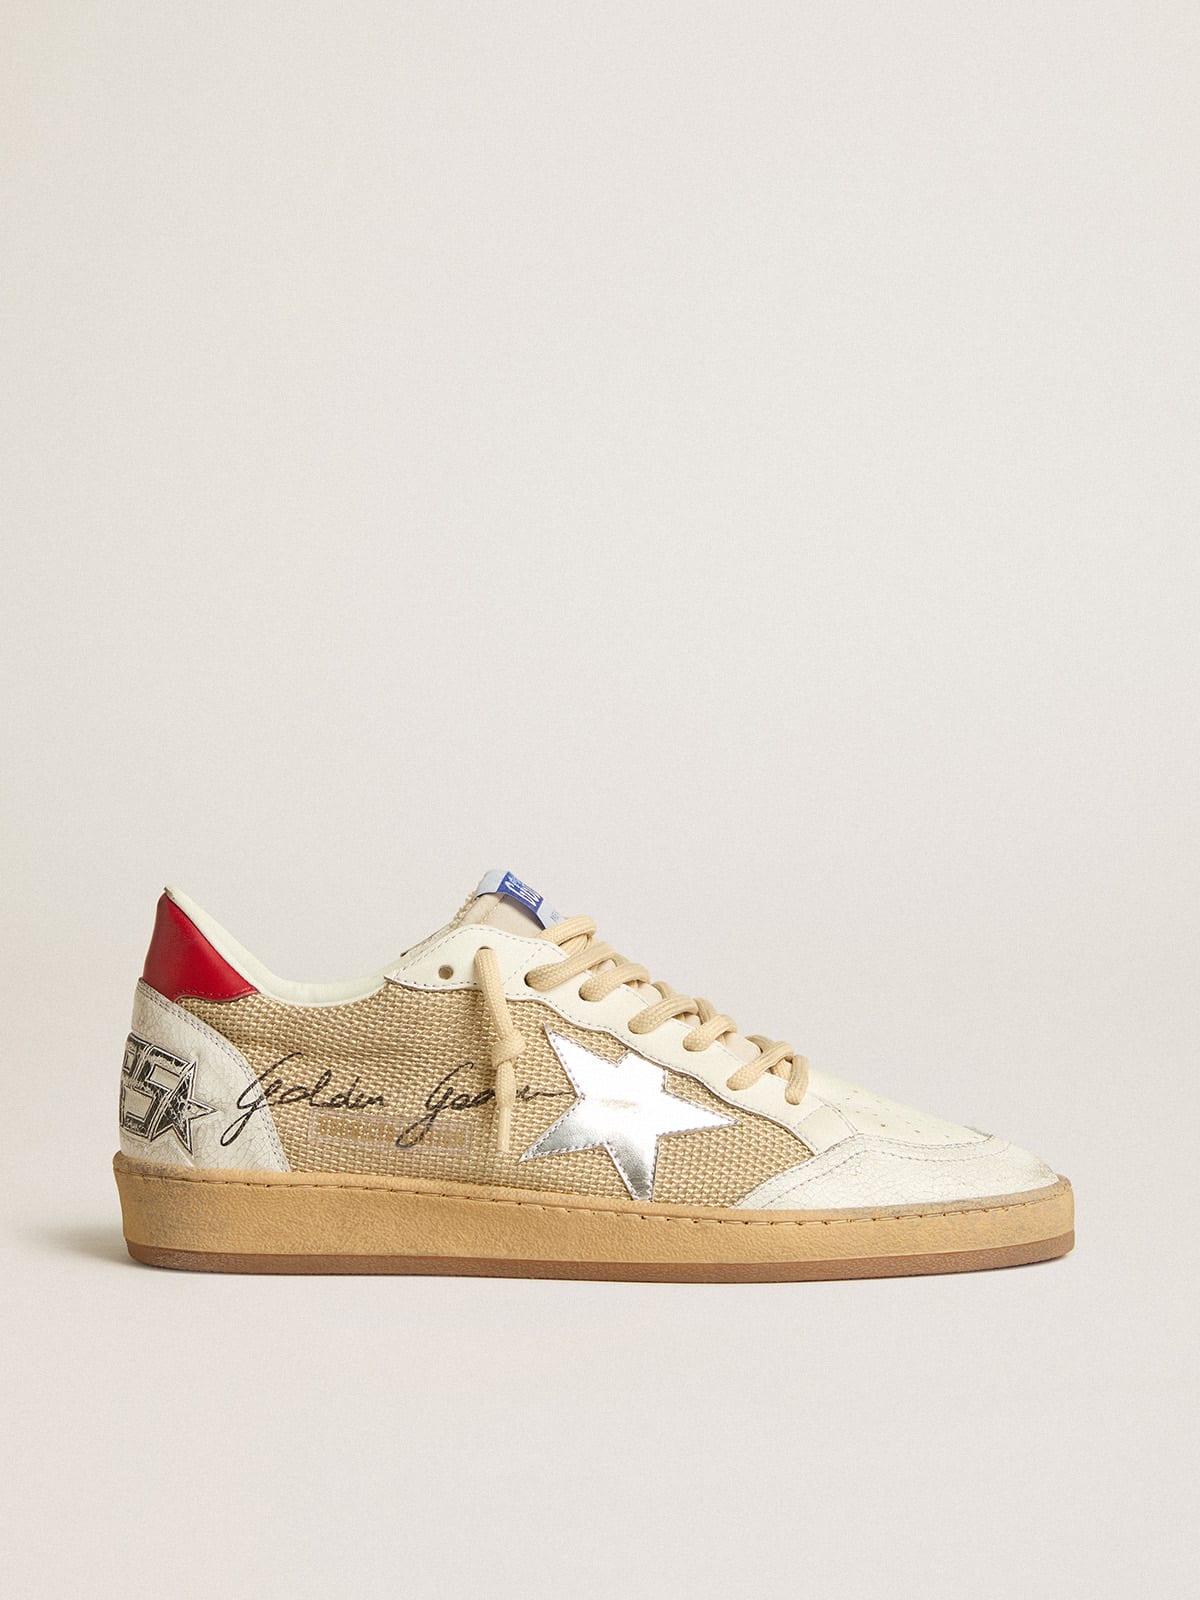 Ball Star LTD in mesh with metallic leather star and red heel tab | Golden  Goose